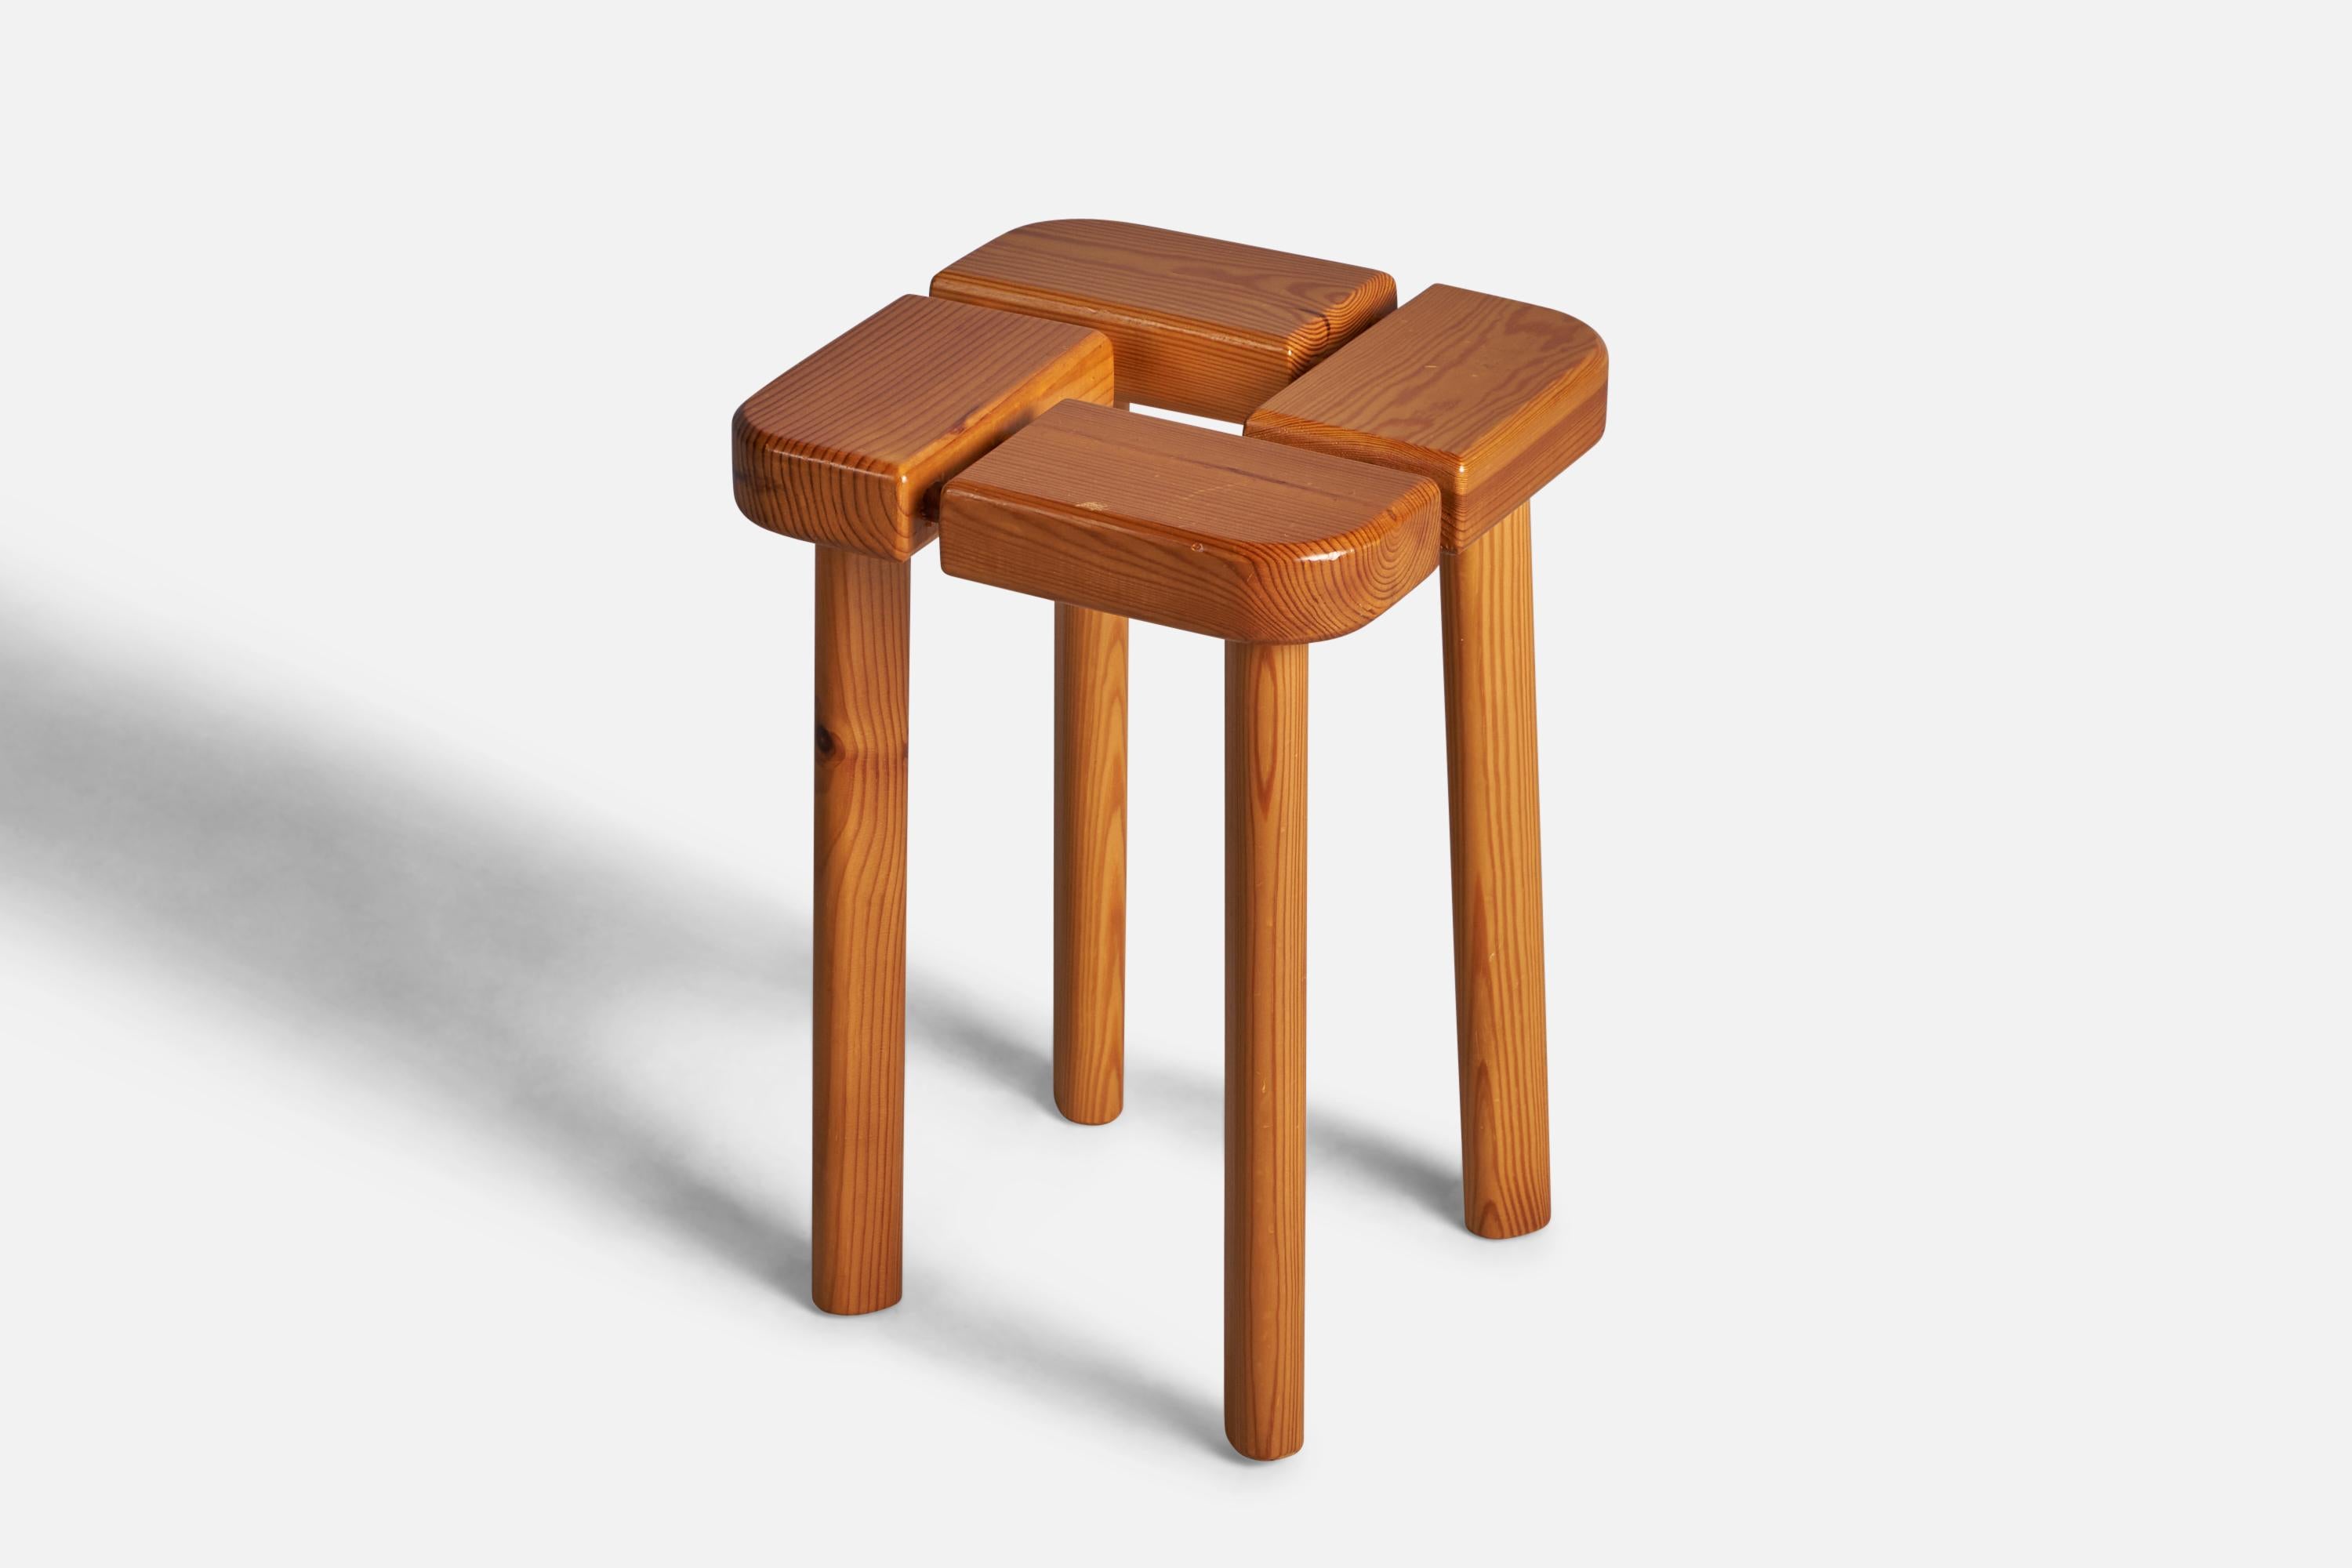 A pine stool designed and produced in Finland, c. 1960s.